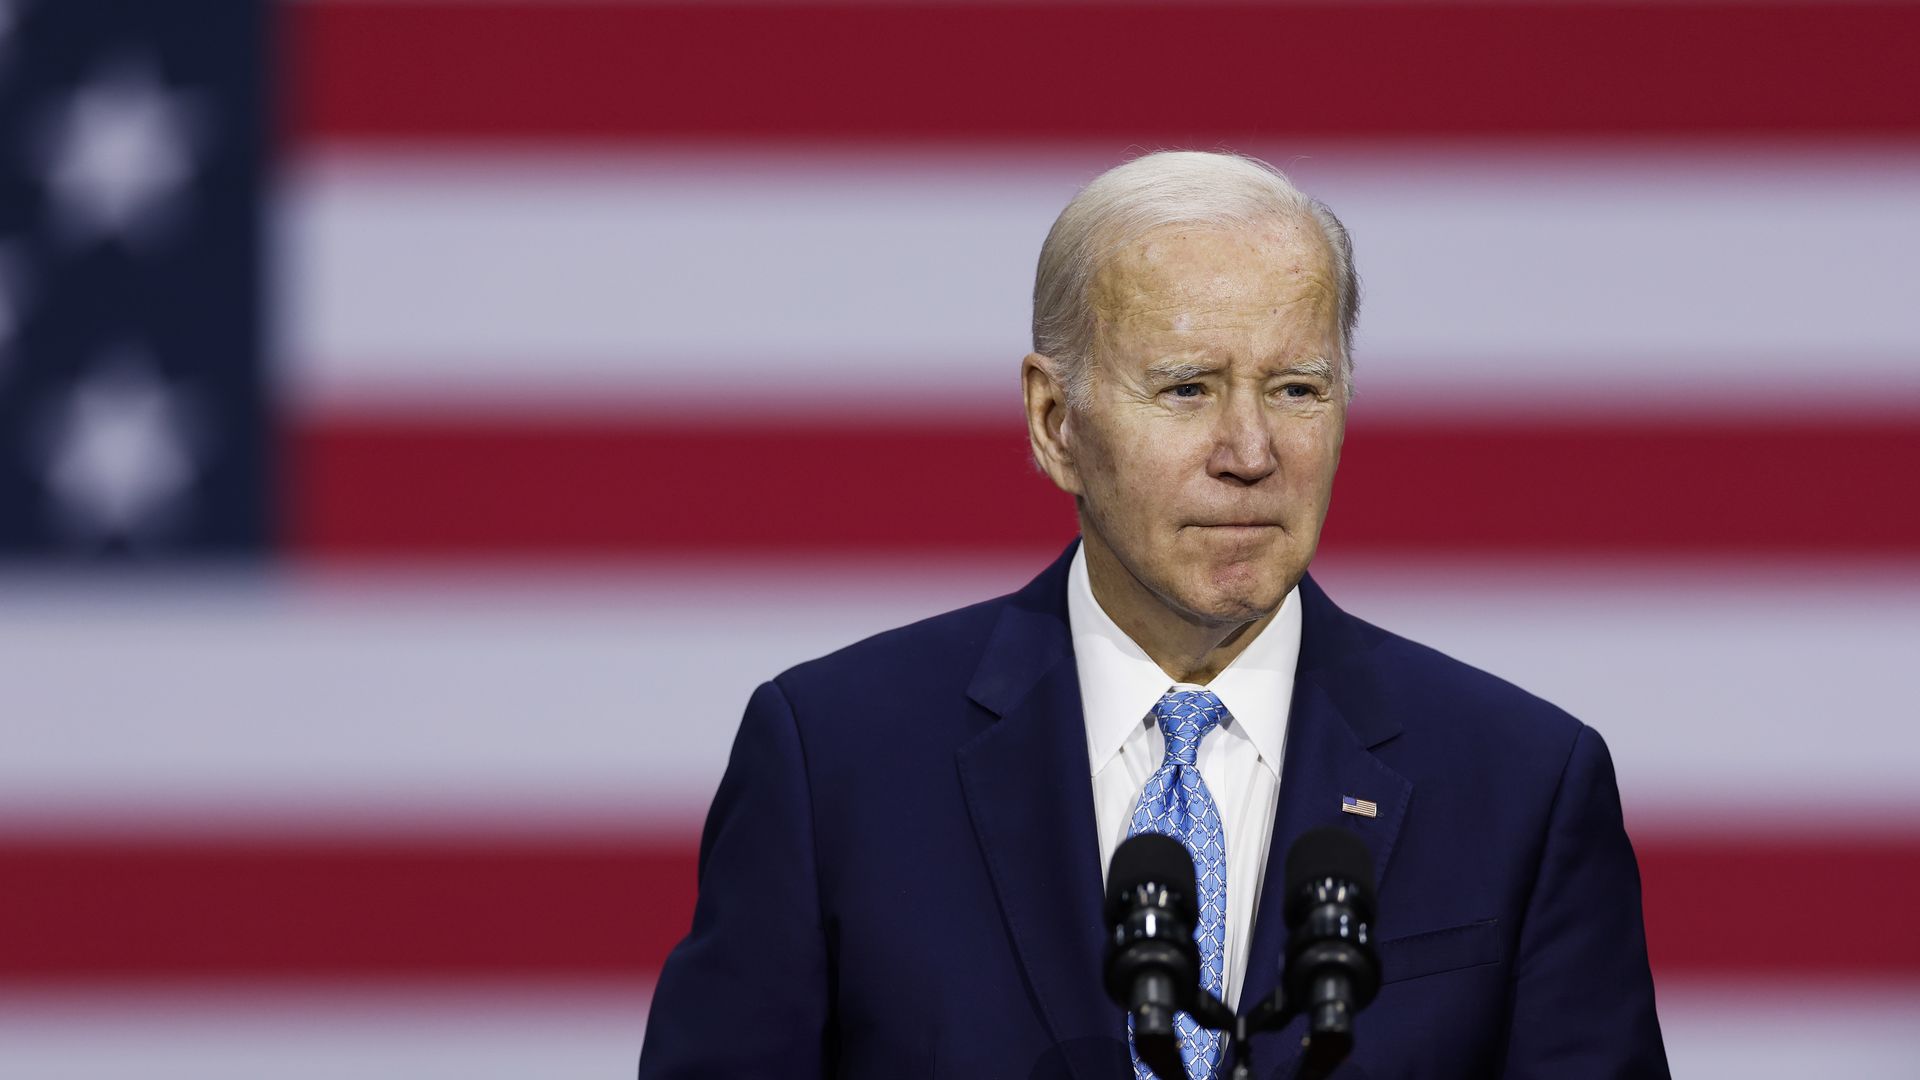 President Biden delivers remarks in Virginia Beach on Feb. 28. (Photo by Anna Moneymaker/Getty Images)